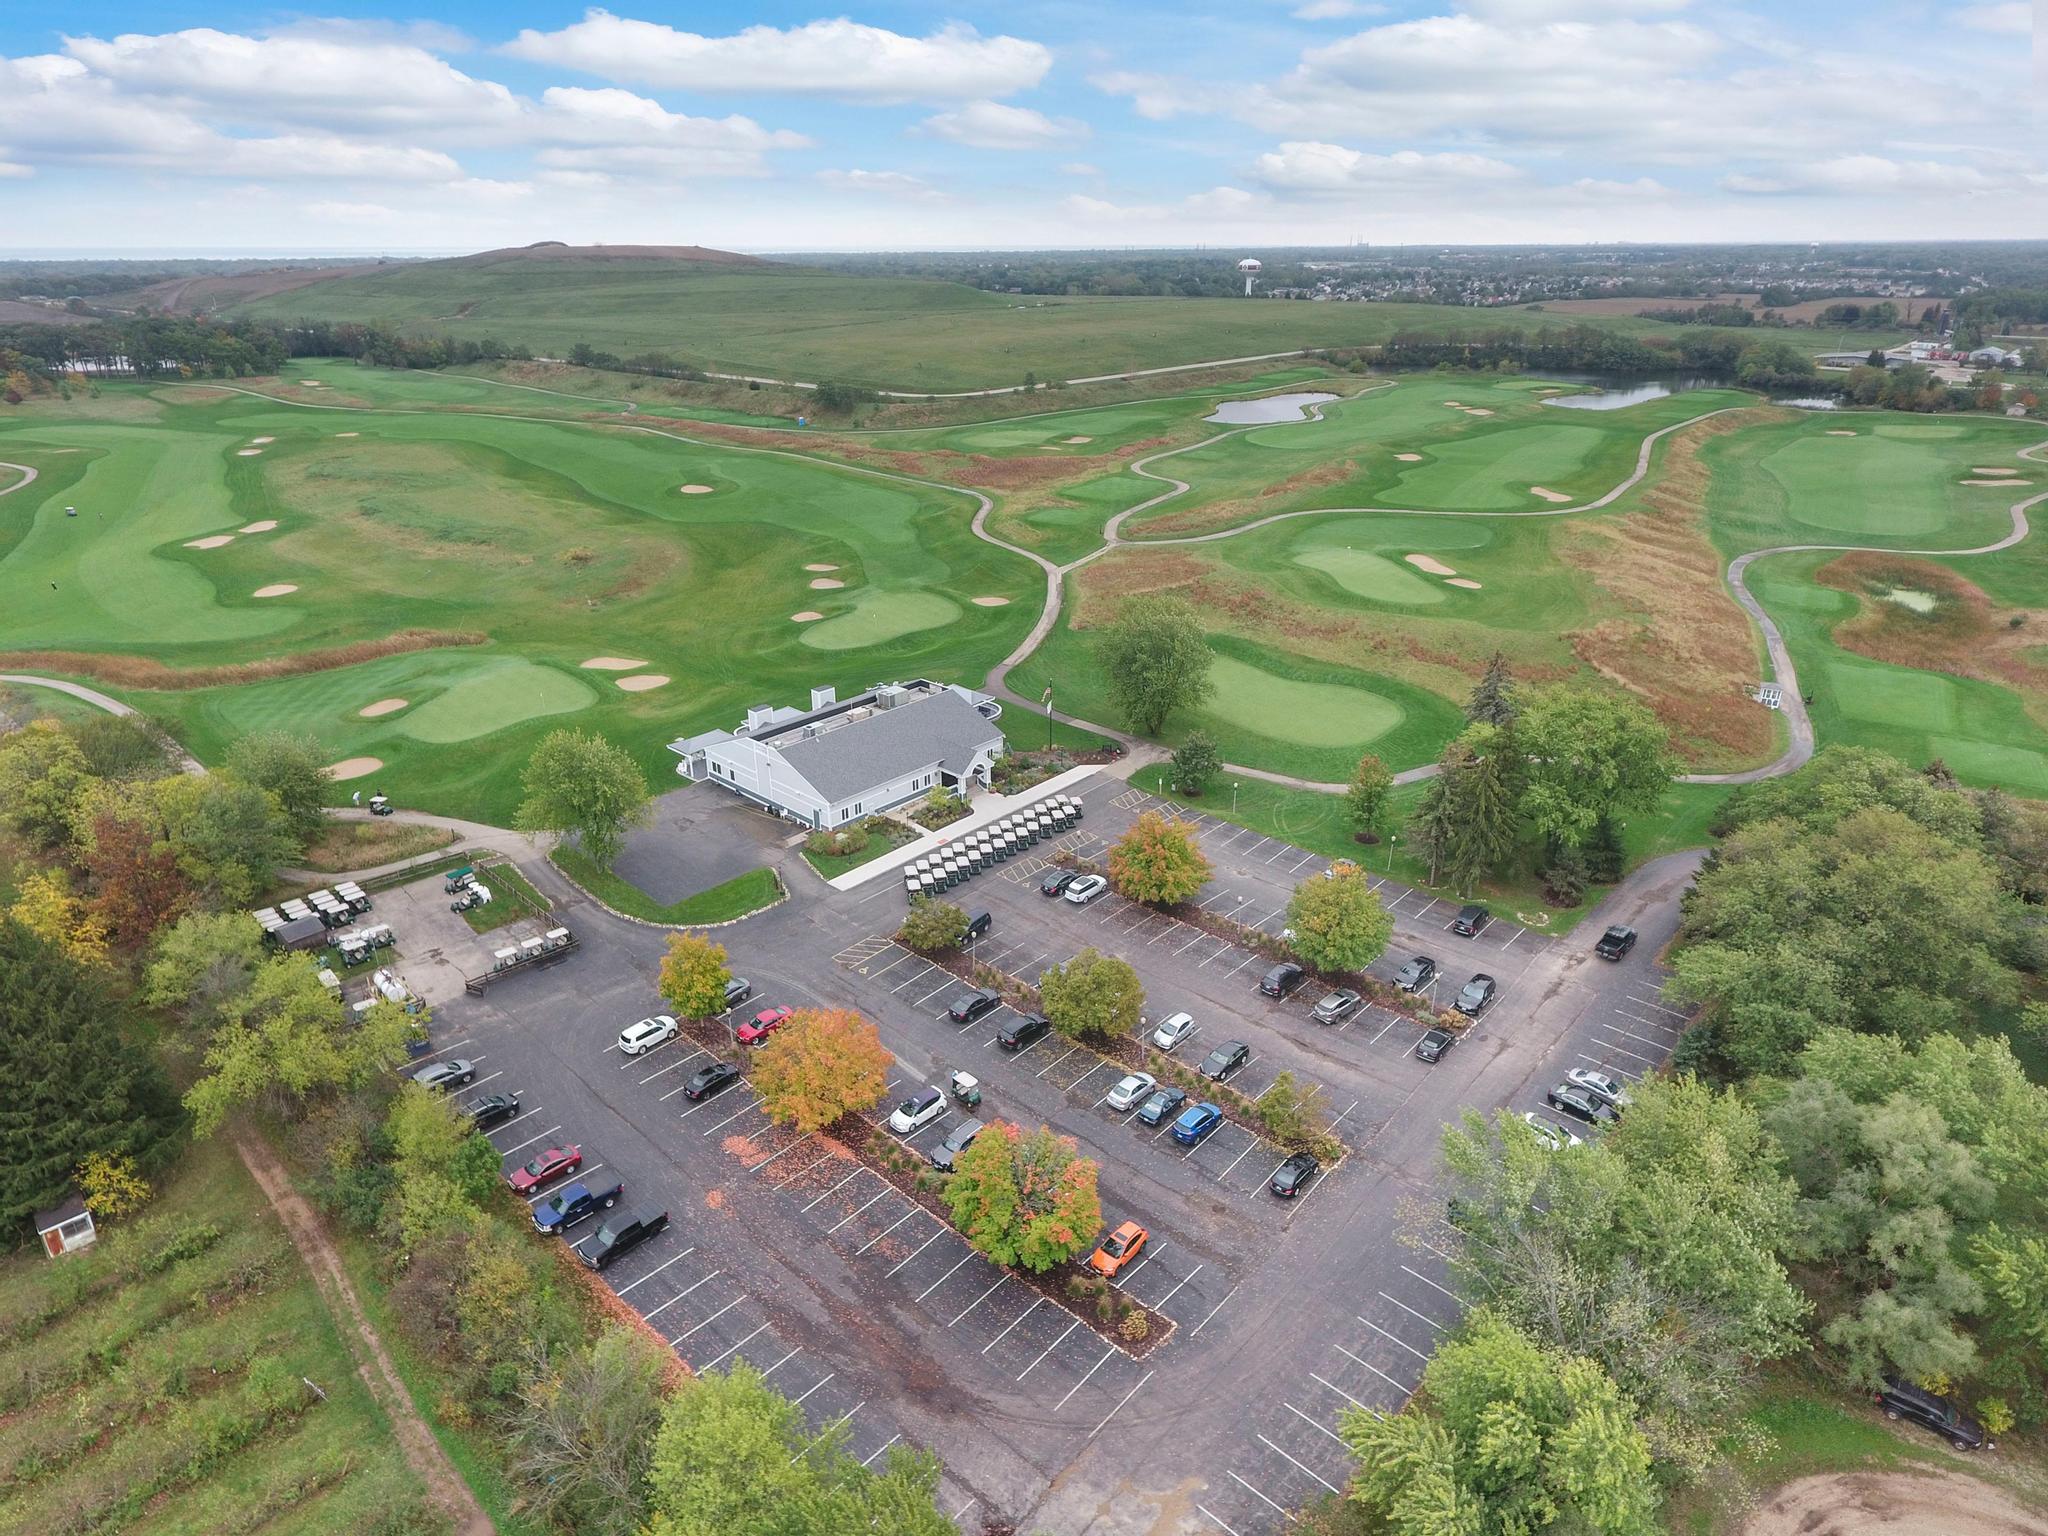 birds eye view of clubhouse, parking lot, and golf course of Shepherds Crook